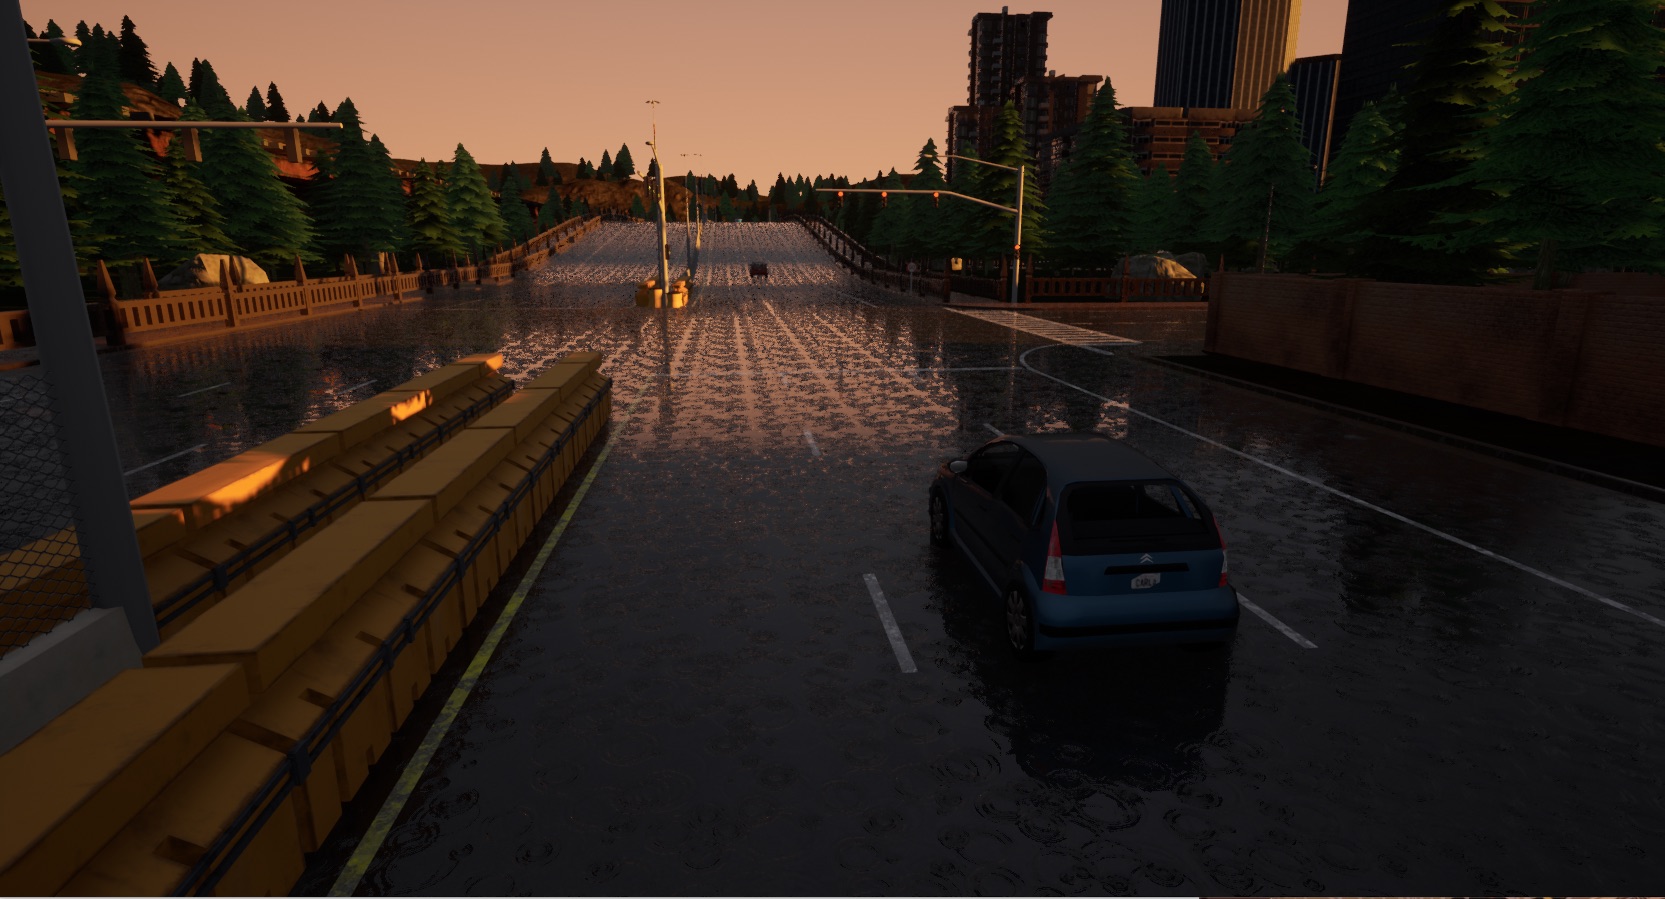 Modified lane changing scenario in a different town